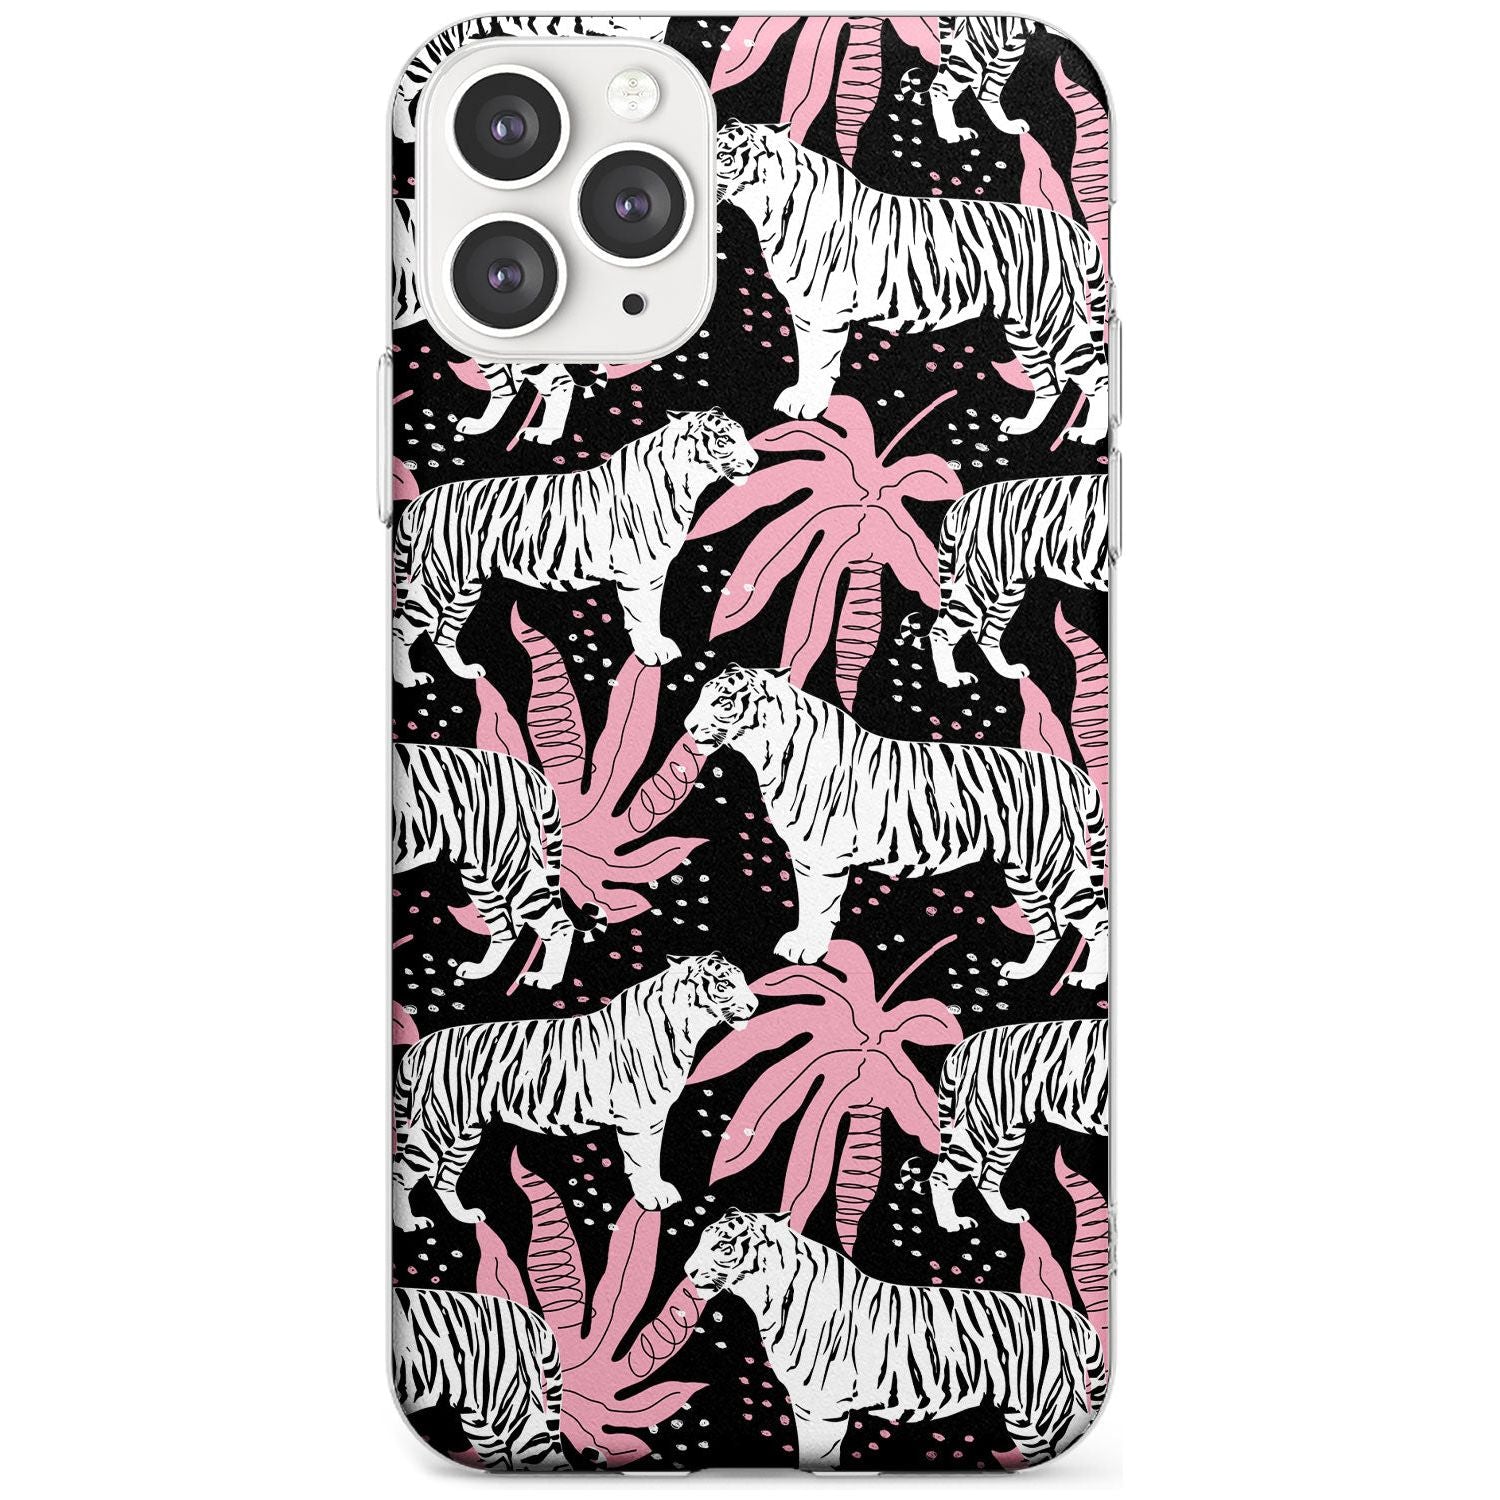 White Tigers on Black Pattern Slim TPU Phone Case for iPhone 11 Pro Max